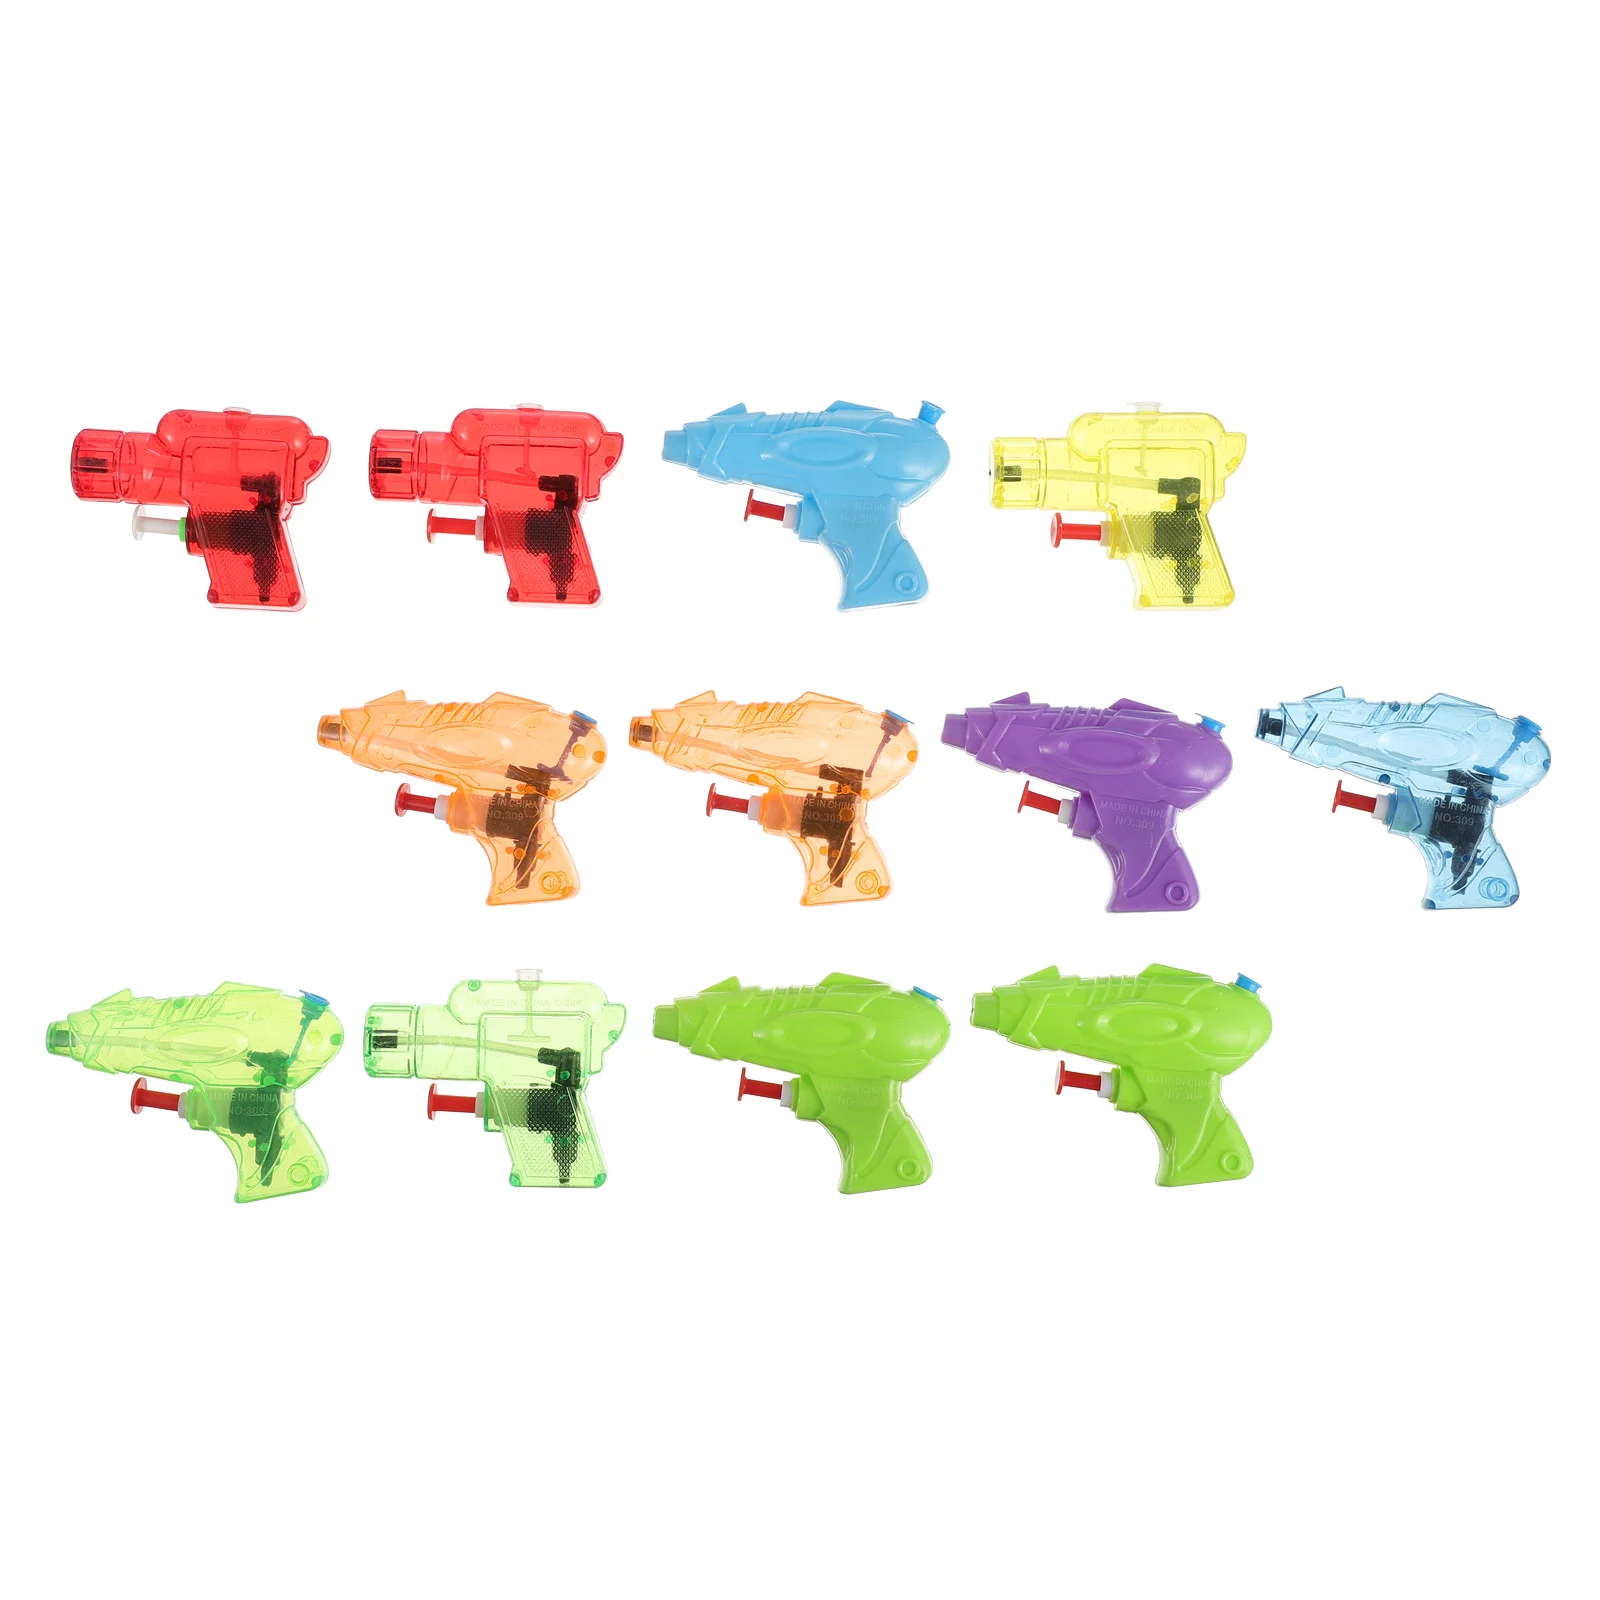 

12pcs Water Toys Water Shooter Toys Kids Beach Toys Kids Plaything (Random Color) Guns for